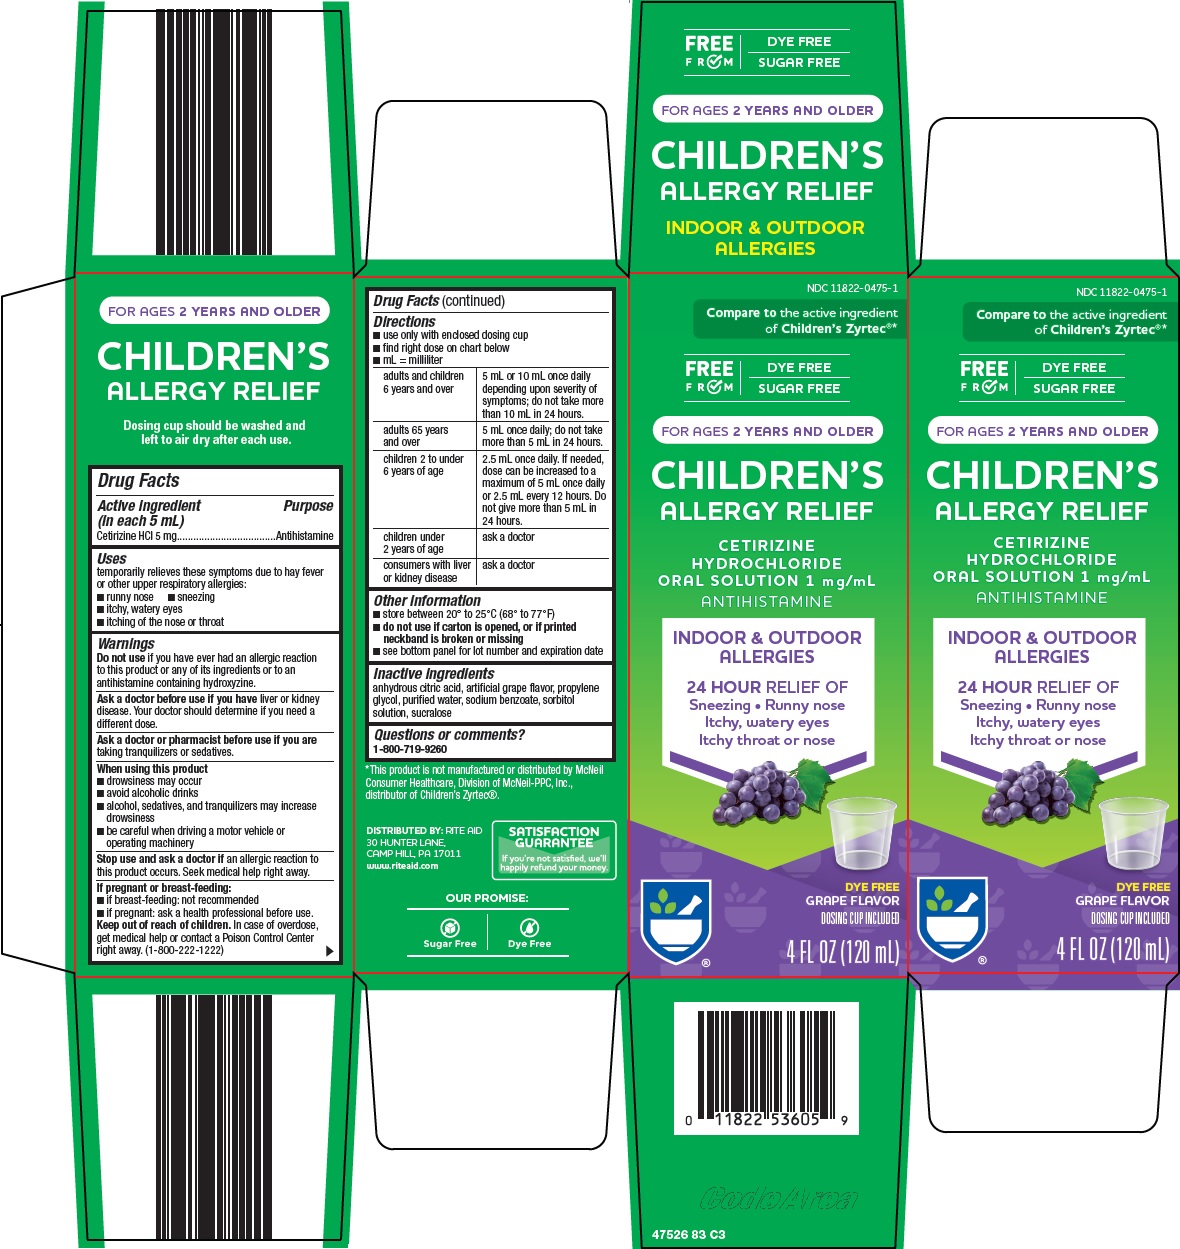 Childrens Allergy Relief | Cetirizine Hcl Solution while Breastfeeding